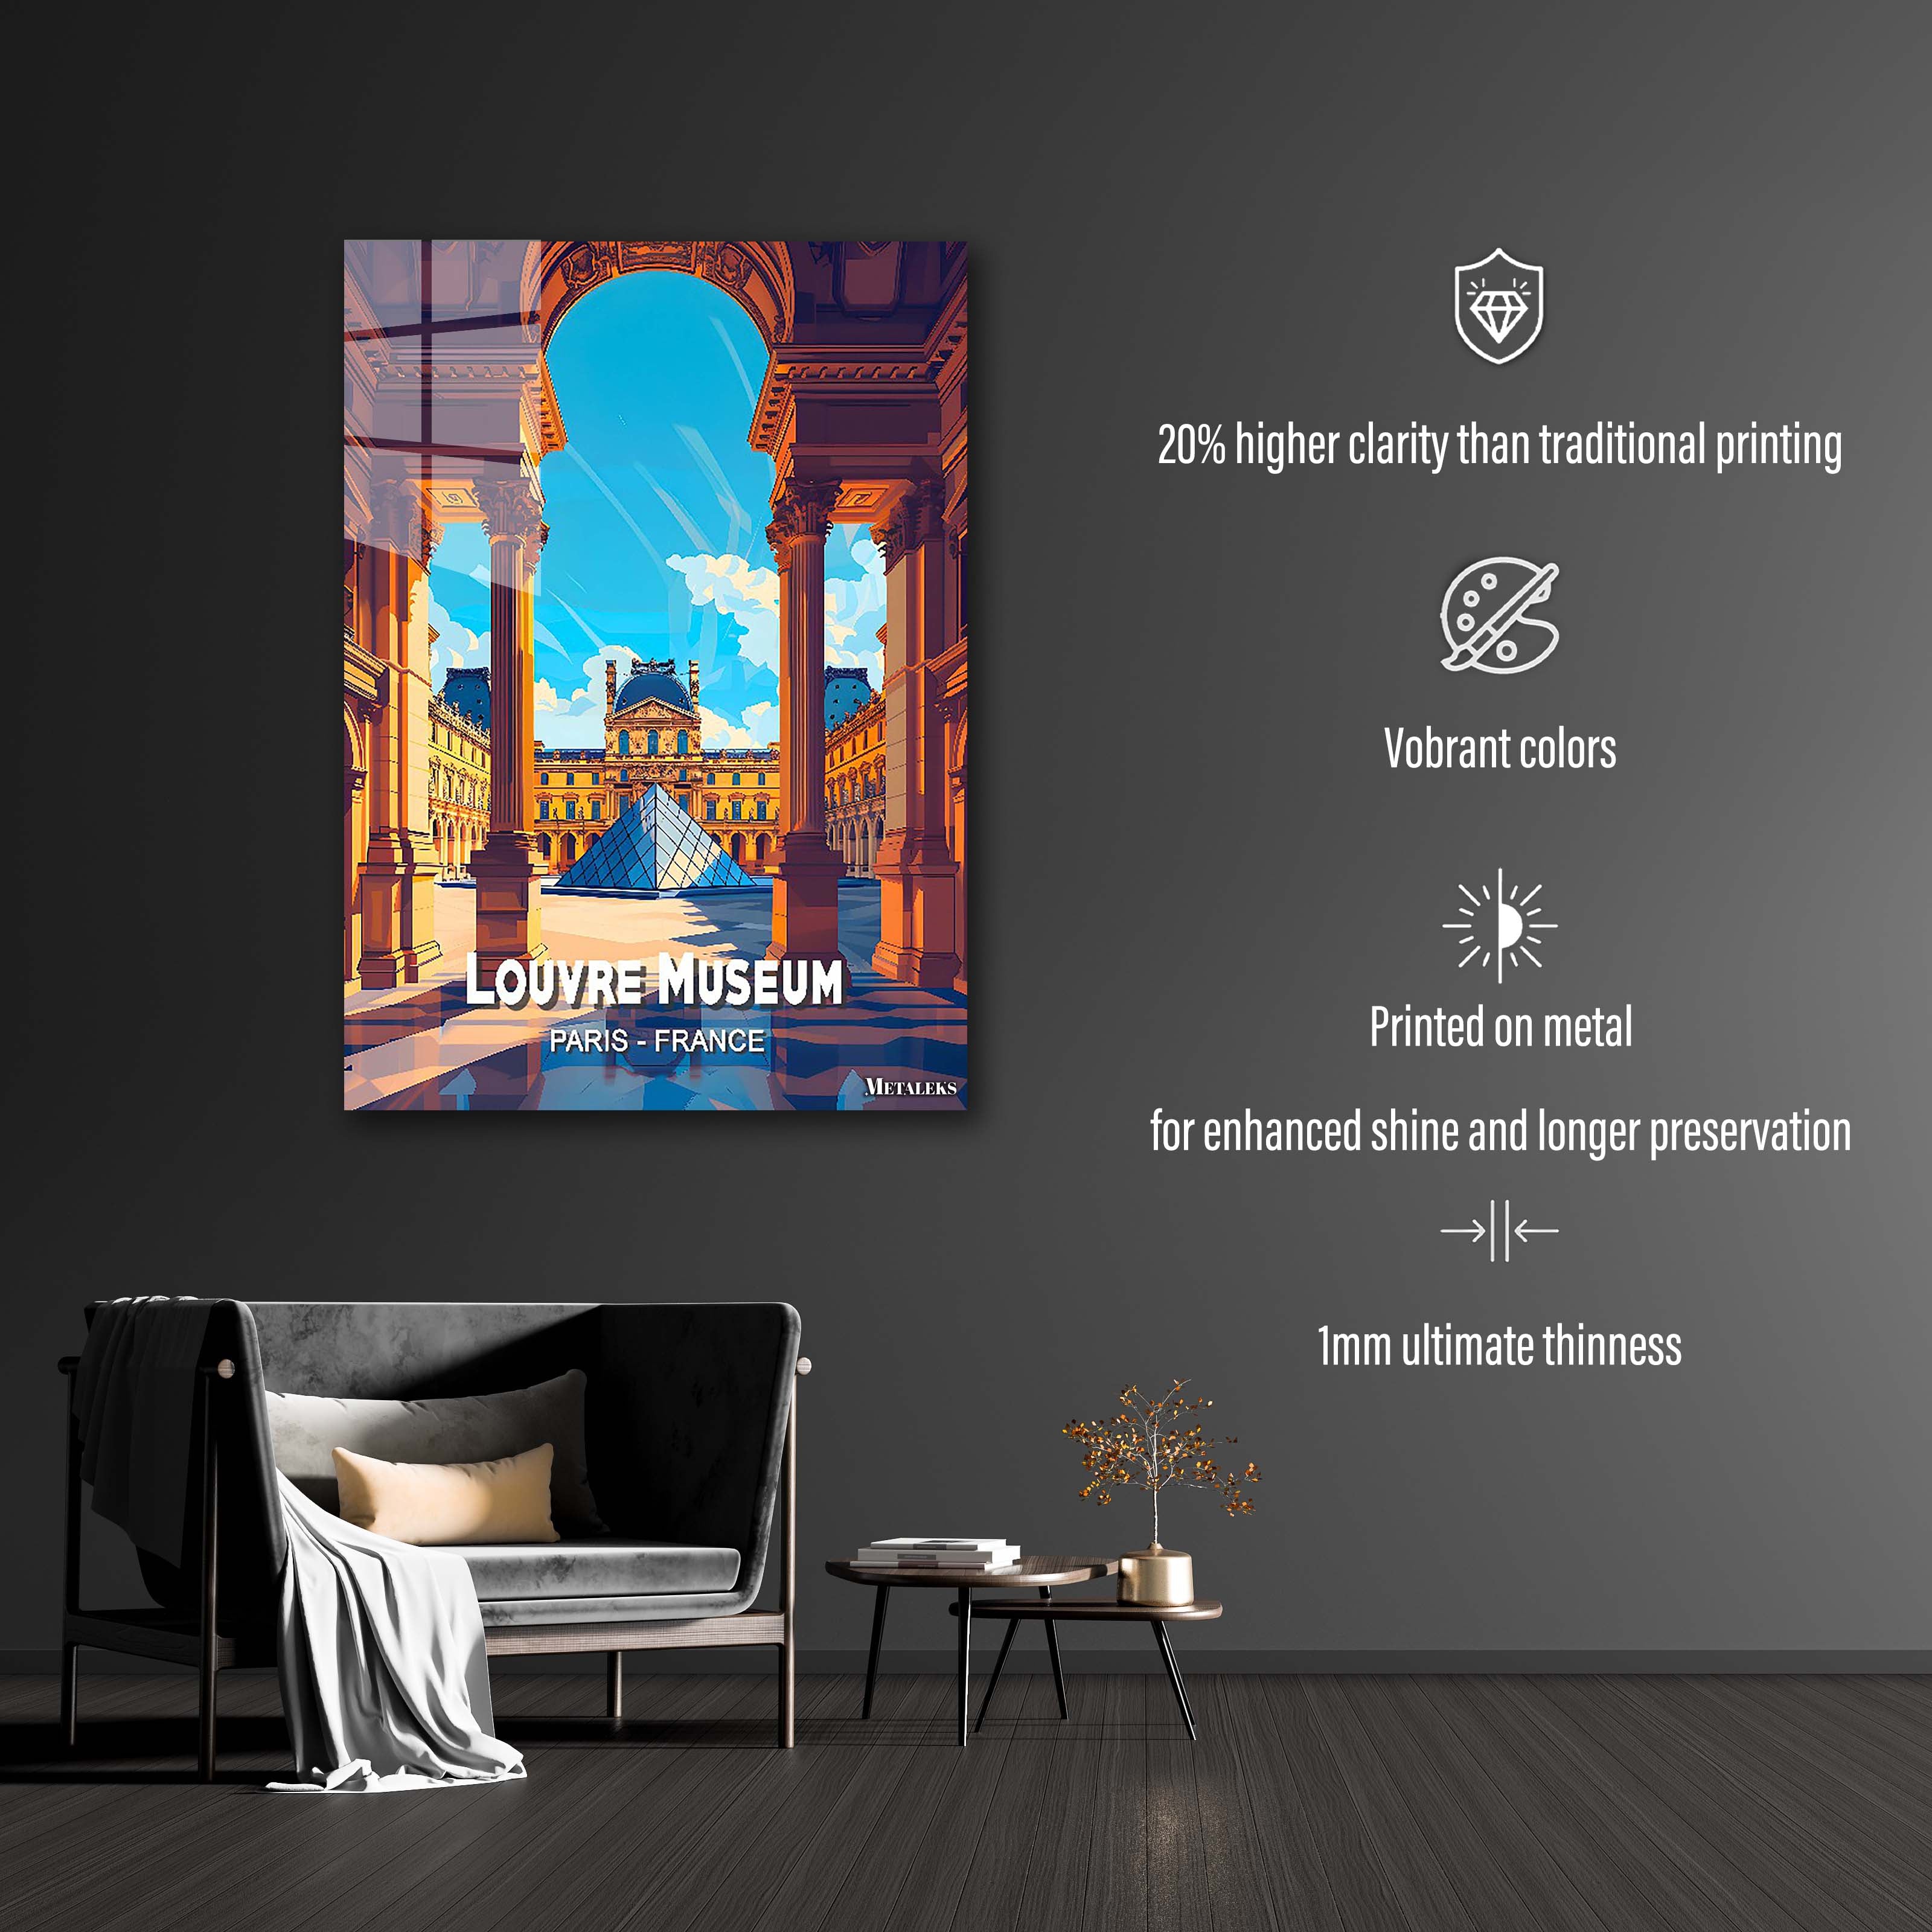 France - Louvre museum 2-designed by @Travel Poster AI